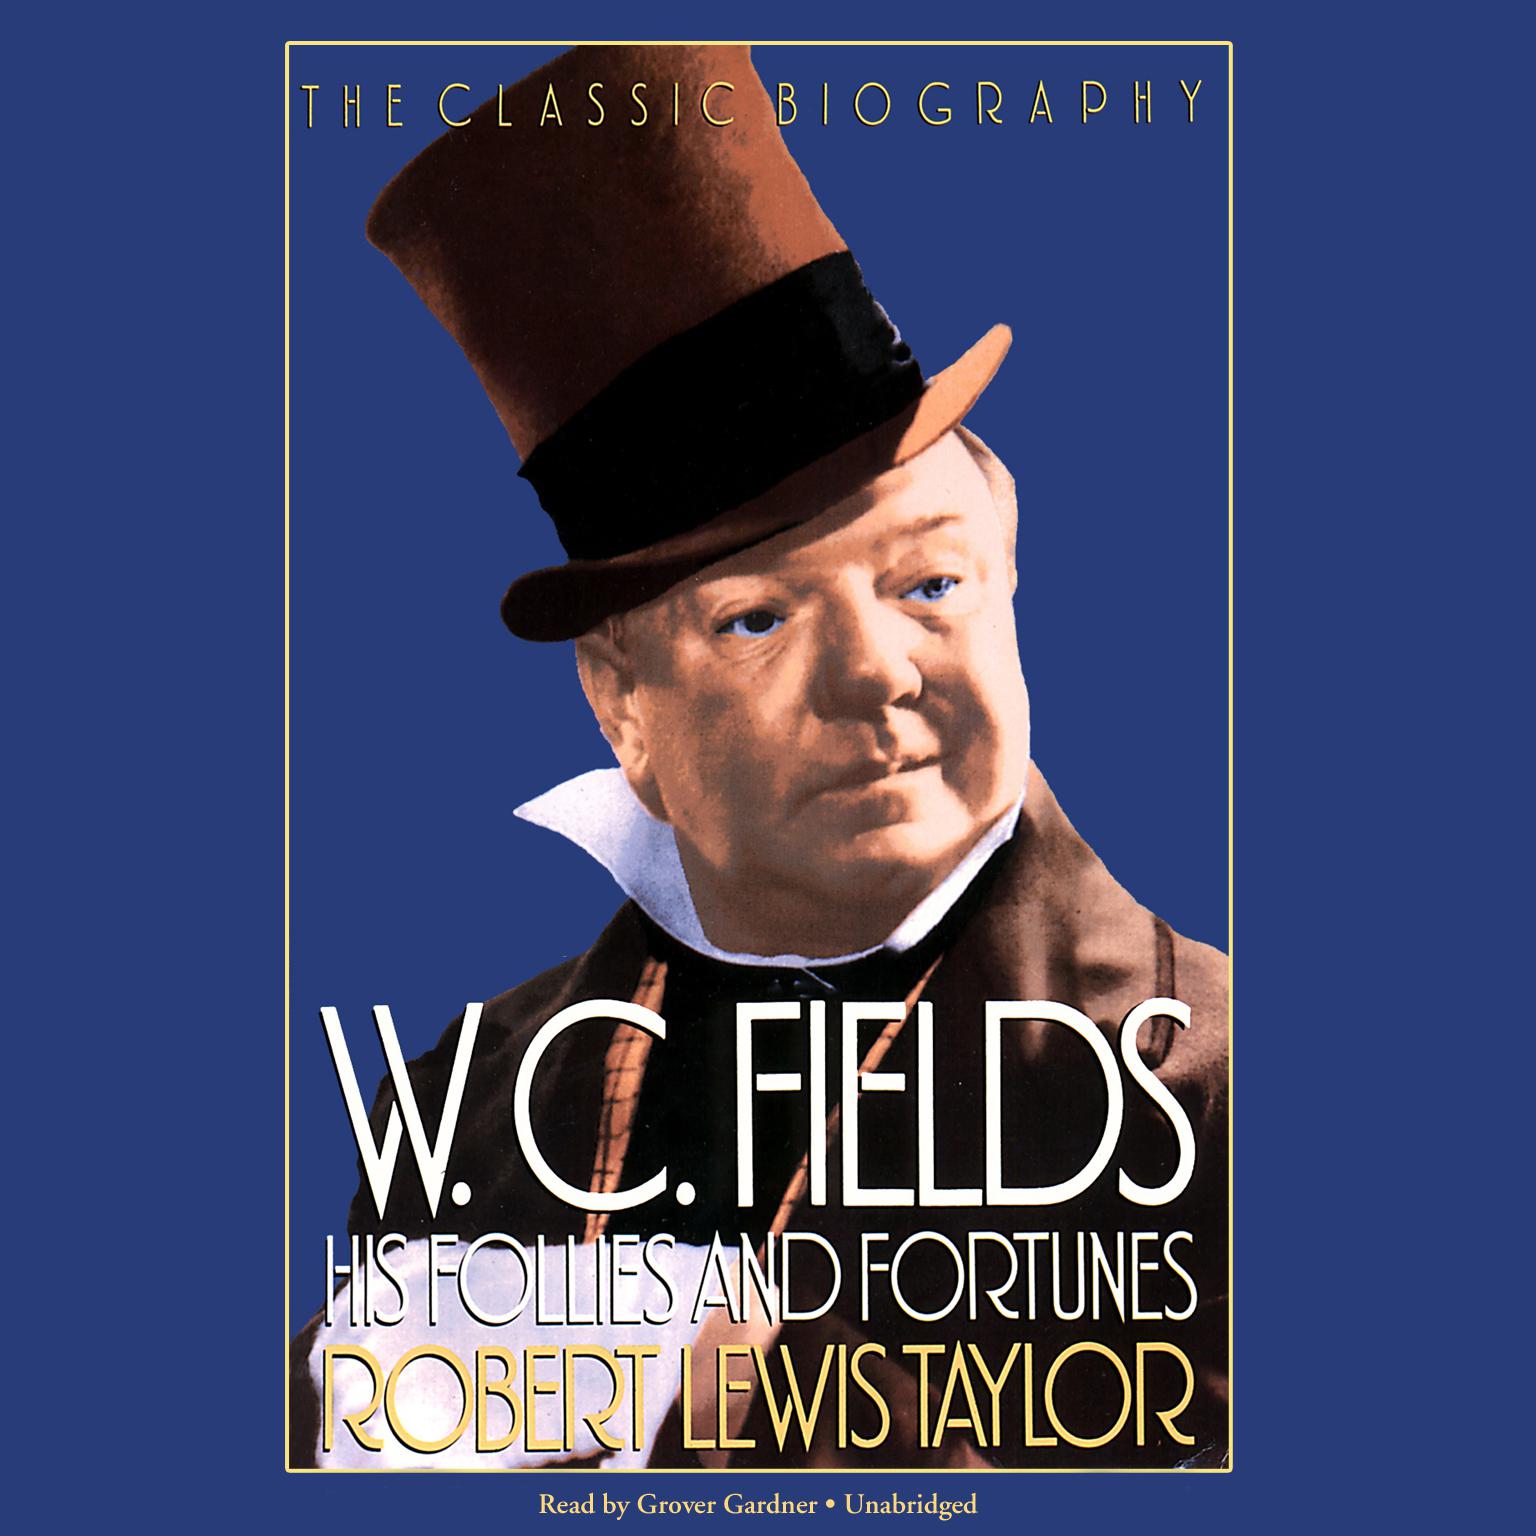 W. C. Fields: His Follies and Fortunes Audiobook, by Robert Lewis Taylor